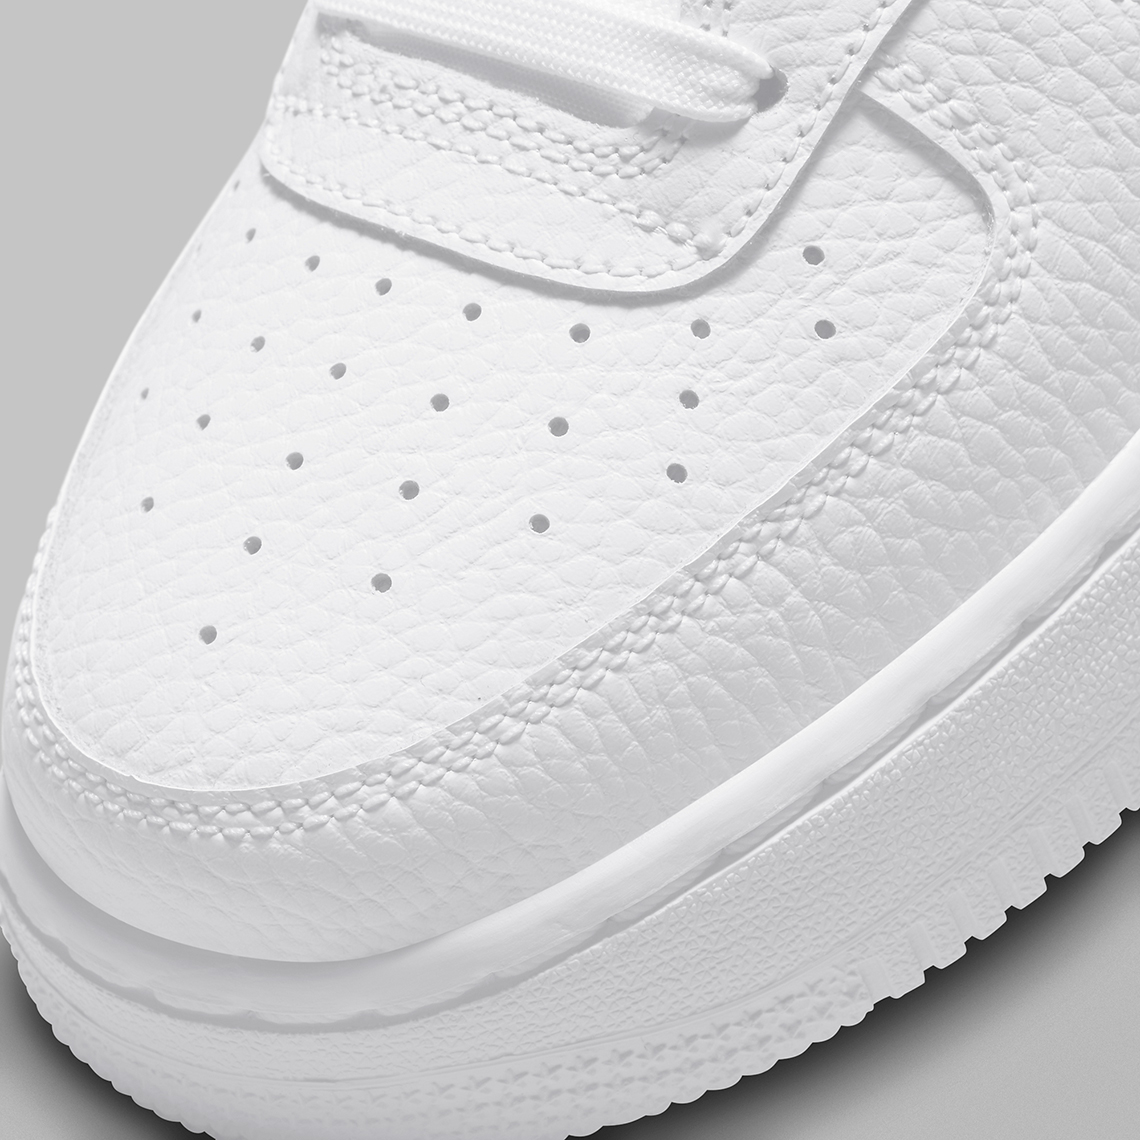 NIKE AIR FORCE 1 LOW WHITE MESH POCKET for £155.00